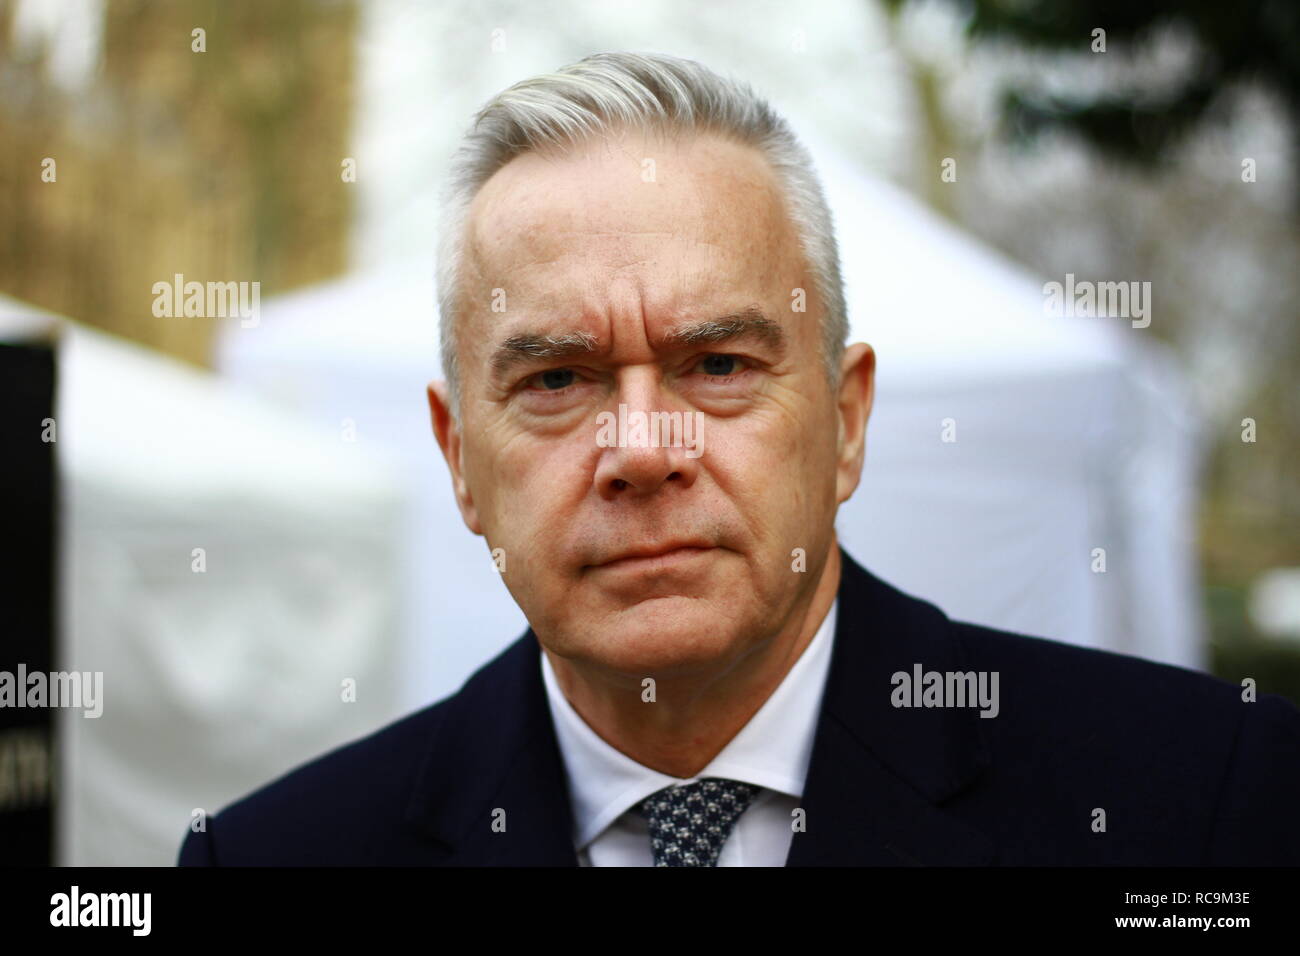 Huw Edwards in Westminster on 14th January 2019. BBC NEWS reader. 10 O' Clock news presenter. Journalist. Author. Writer. Occupations. Journalism. Politics. Political Journalists. Welsh men. Russell Moore portfolio page. Stock Photo